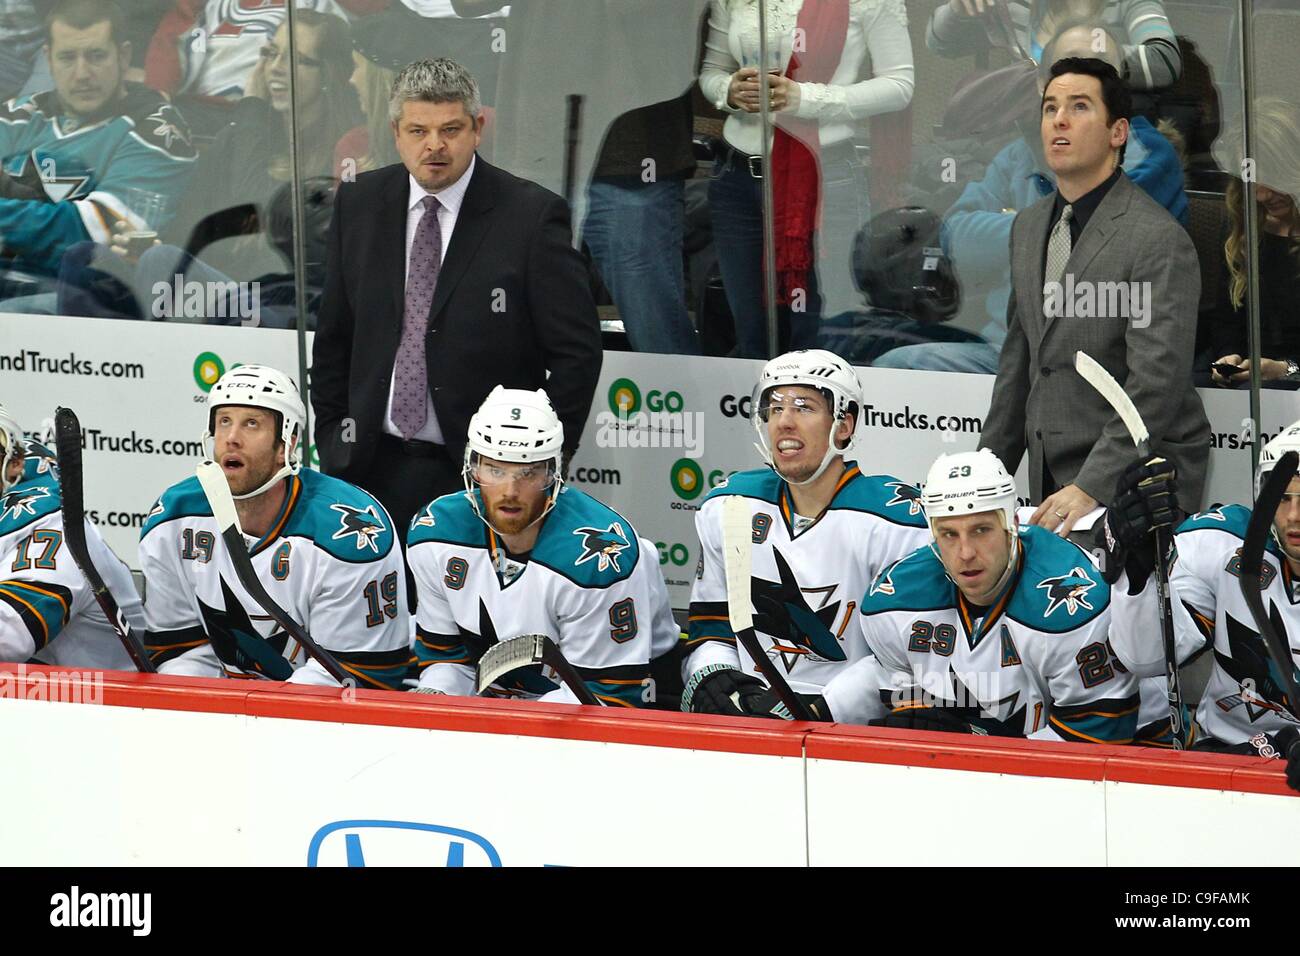 Dec. 13, 2011 - Denver, Colorado, U.S - San Jose Sharks head coach Todd McLellan reacts after a Colorado Avalanche goal in the first period. Colorado leads 1-0 after the first period. The Colorado Avalanche hosted the San Jose Sharks at the Pepsi Center in Denver, CO. (Credit Image: © Isaiah Downing Stock Photo